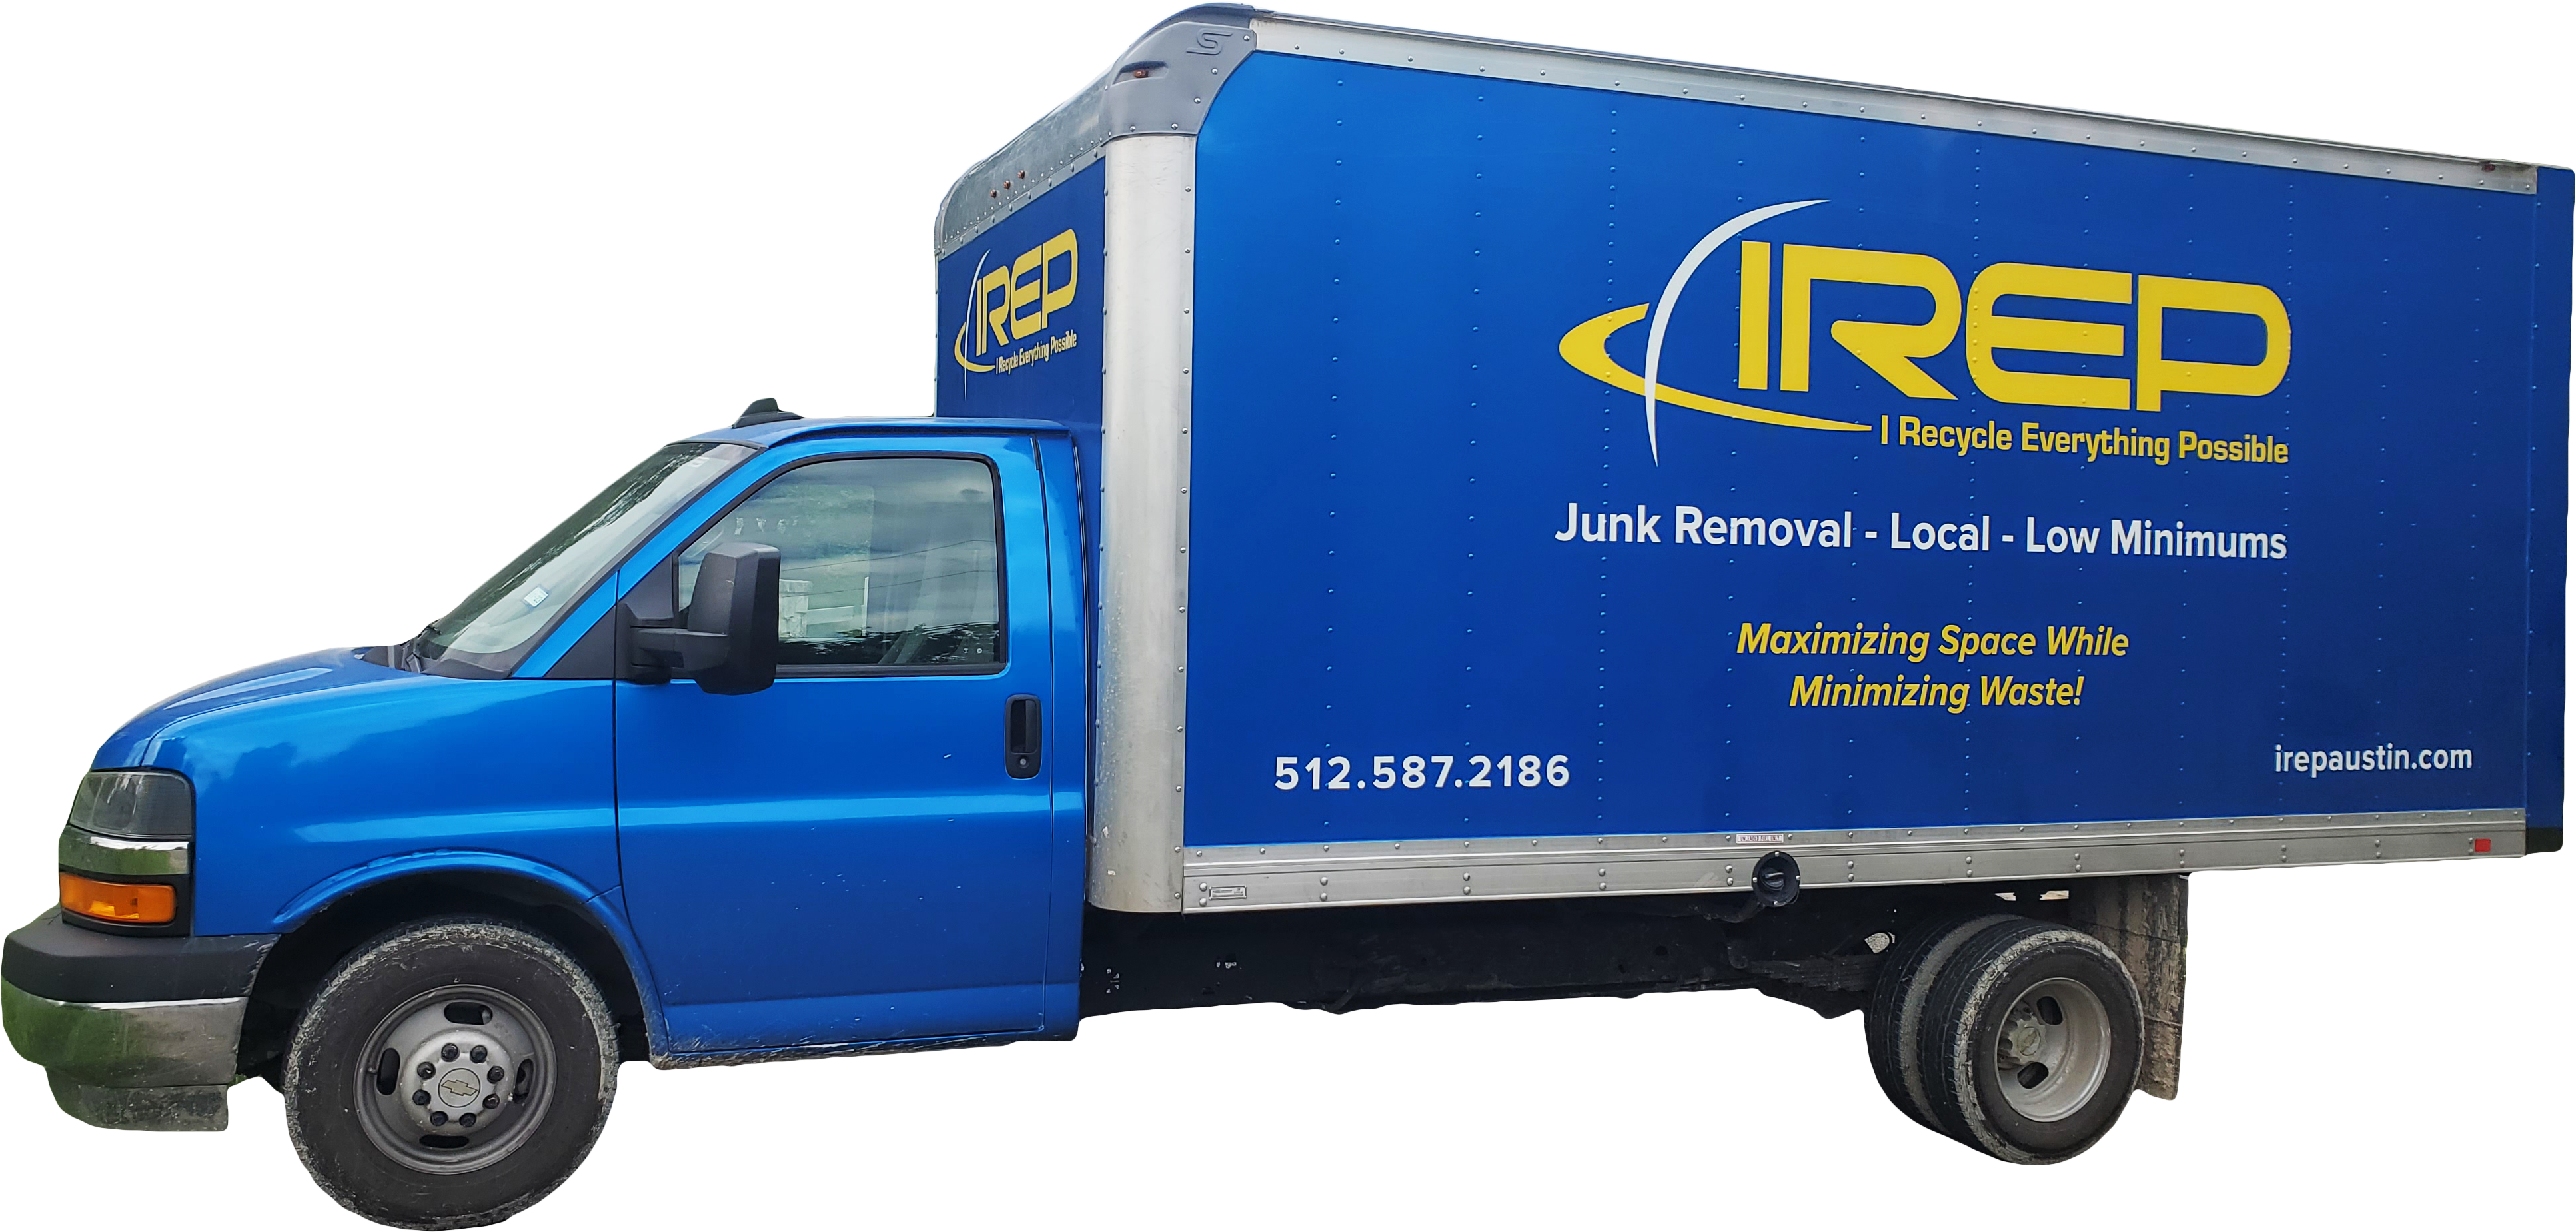 IREP Junk Removal truck #IREPtrucktrack truck transparent cut out track